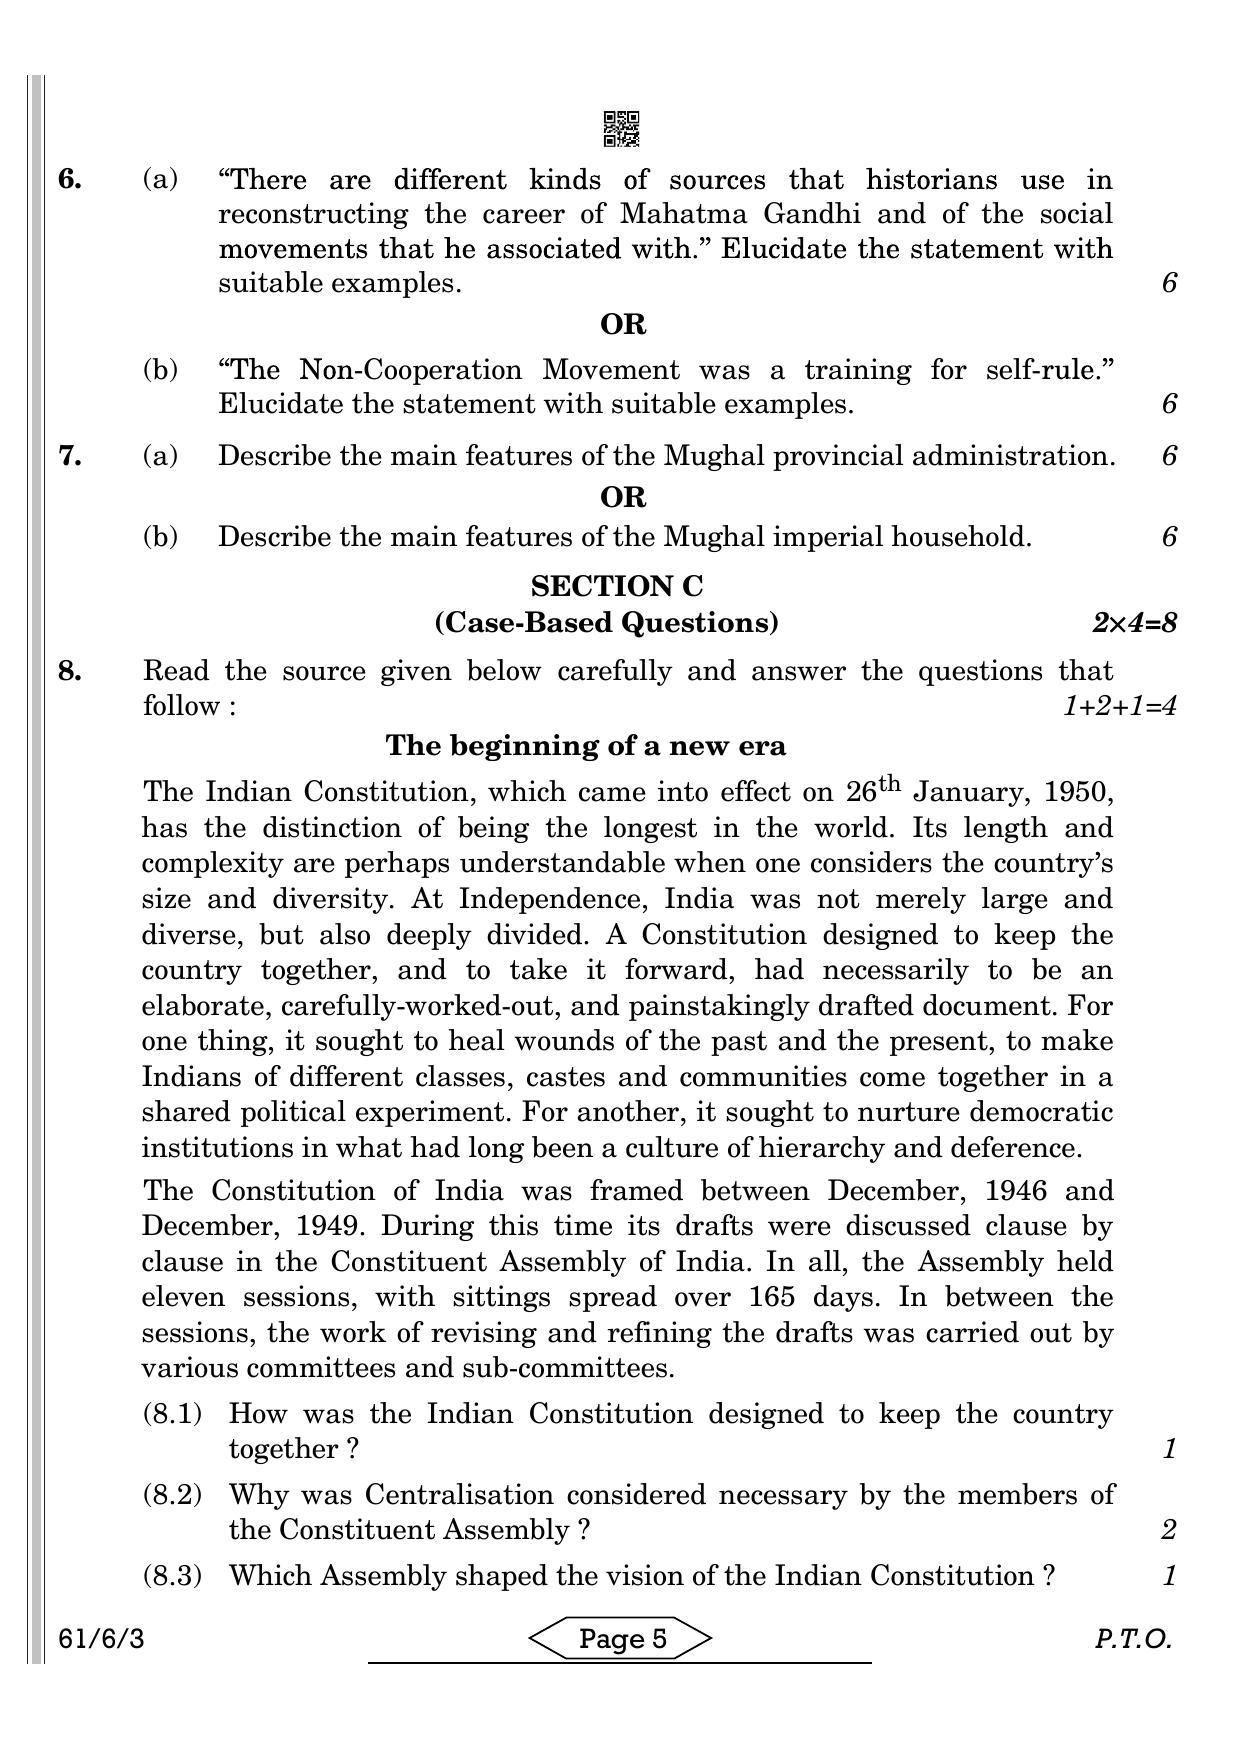 CBSE Class 12 61-6-3 HISTORY 2022 Compartment Question Paper - Page 5